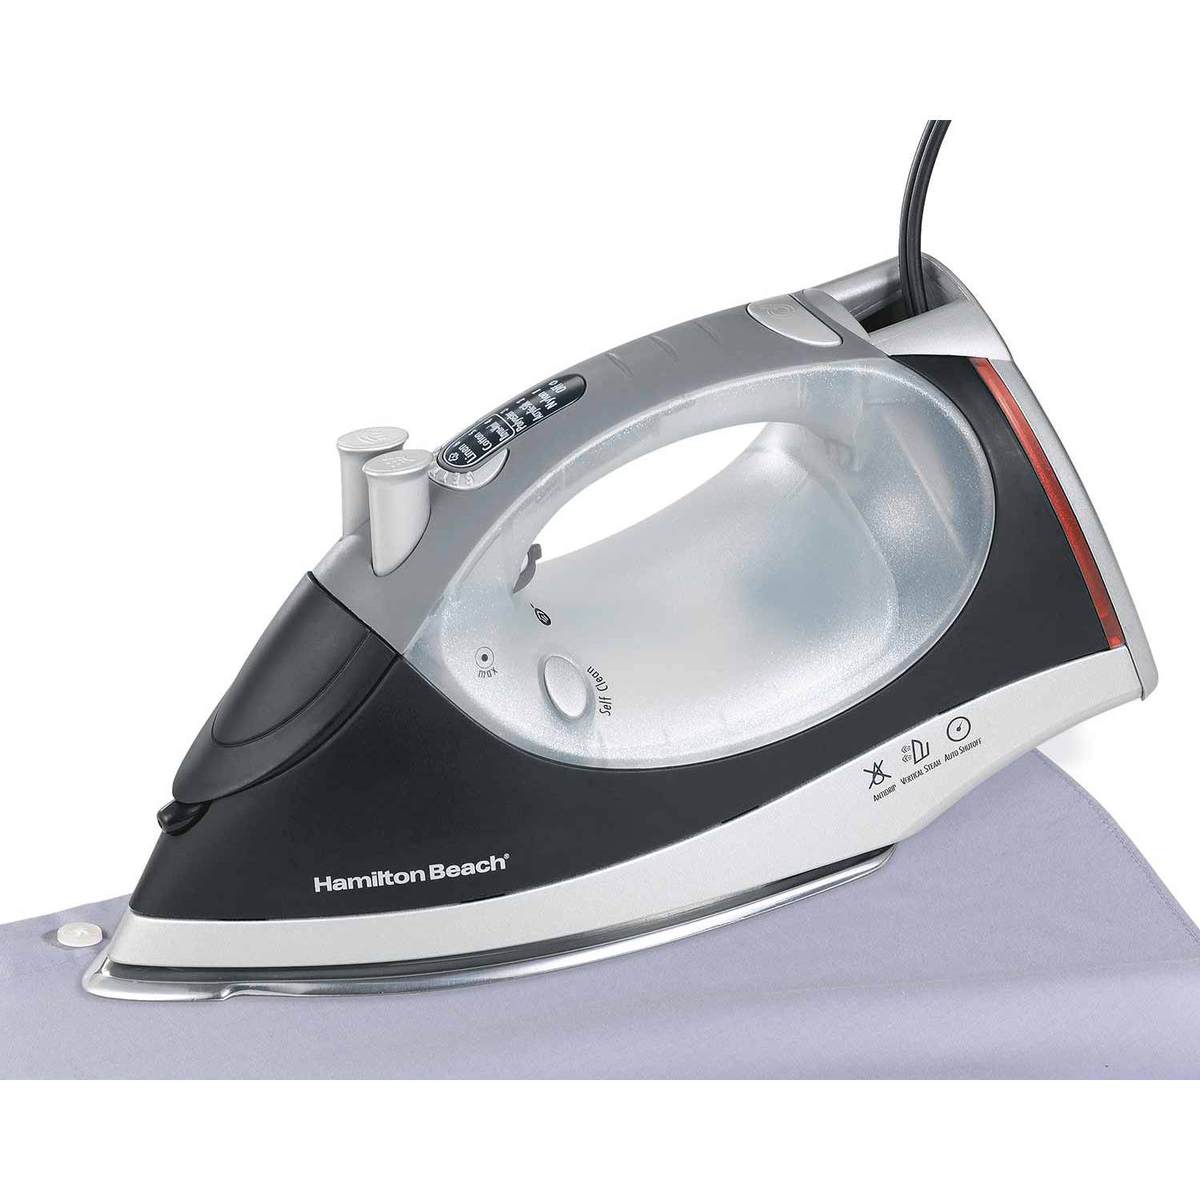 Electronic Control Nonstick Light-up Retractable Cord Iron (14885)